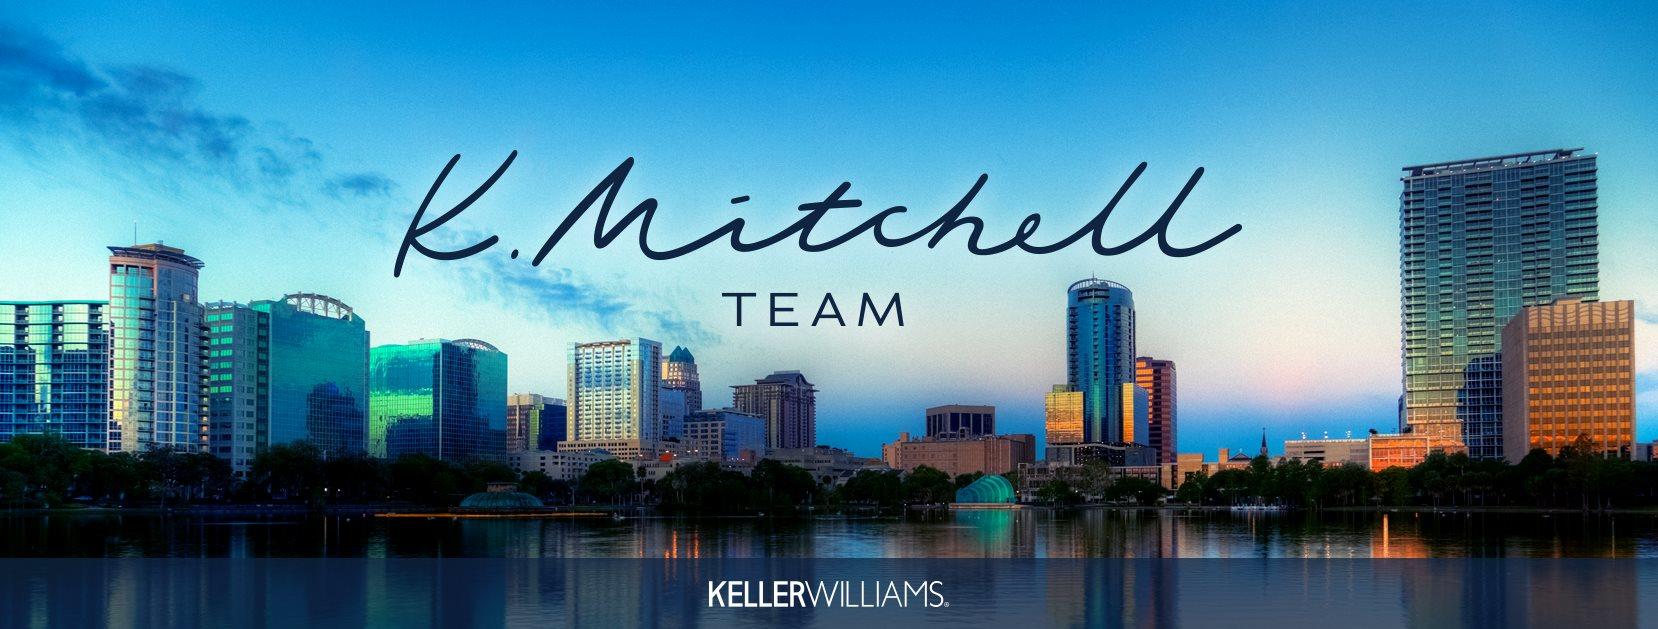 K. Mitchell Team with Keller Williams Realty Photo